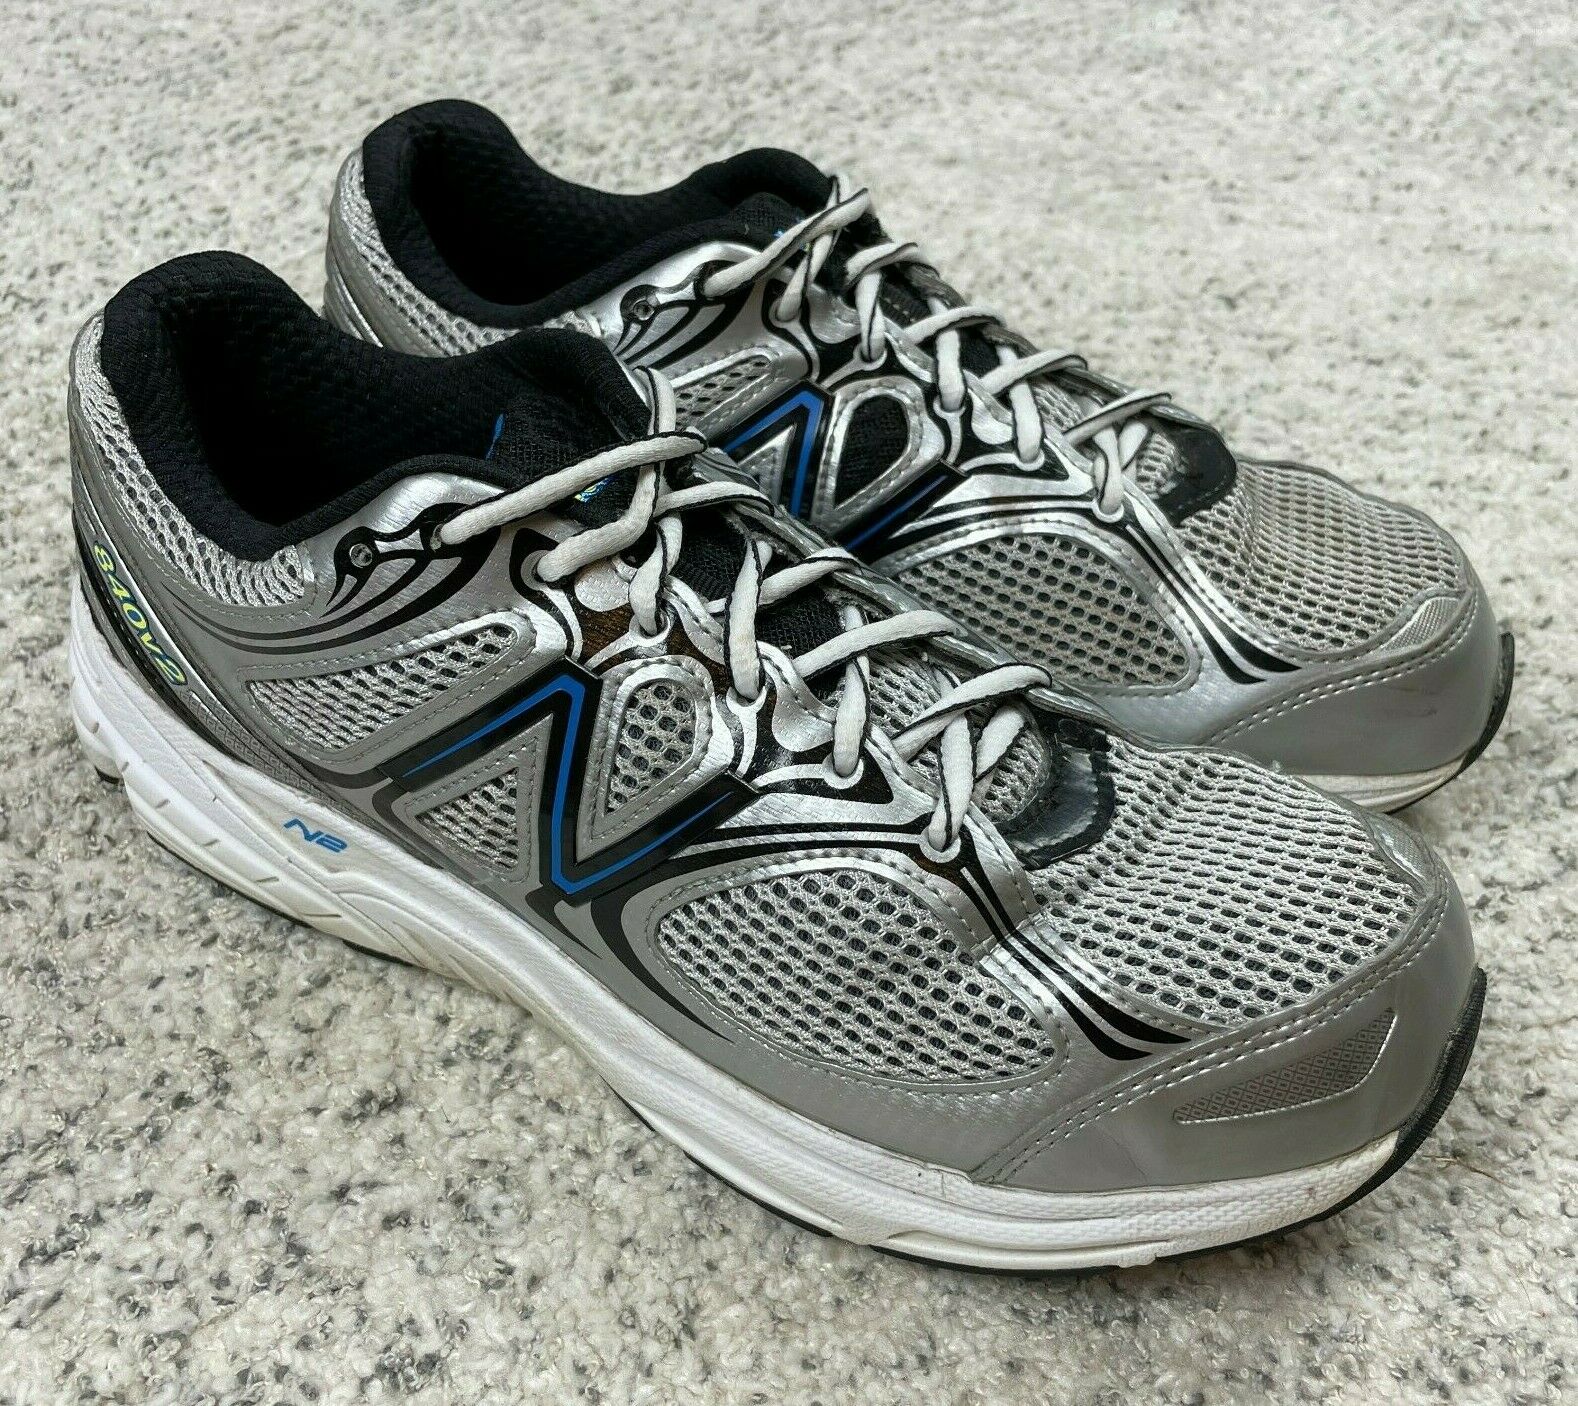 New Balance 840v2 Sneakers Mens 9.5 Shoes Walking Mesh Daily Made In USA M840SB2